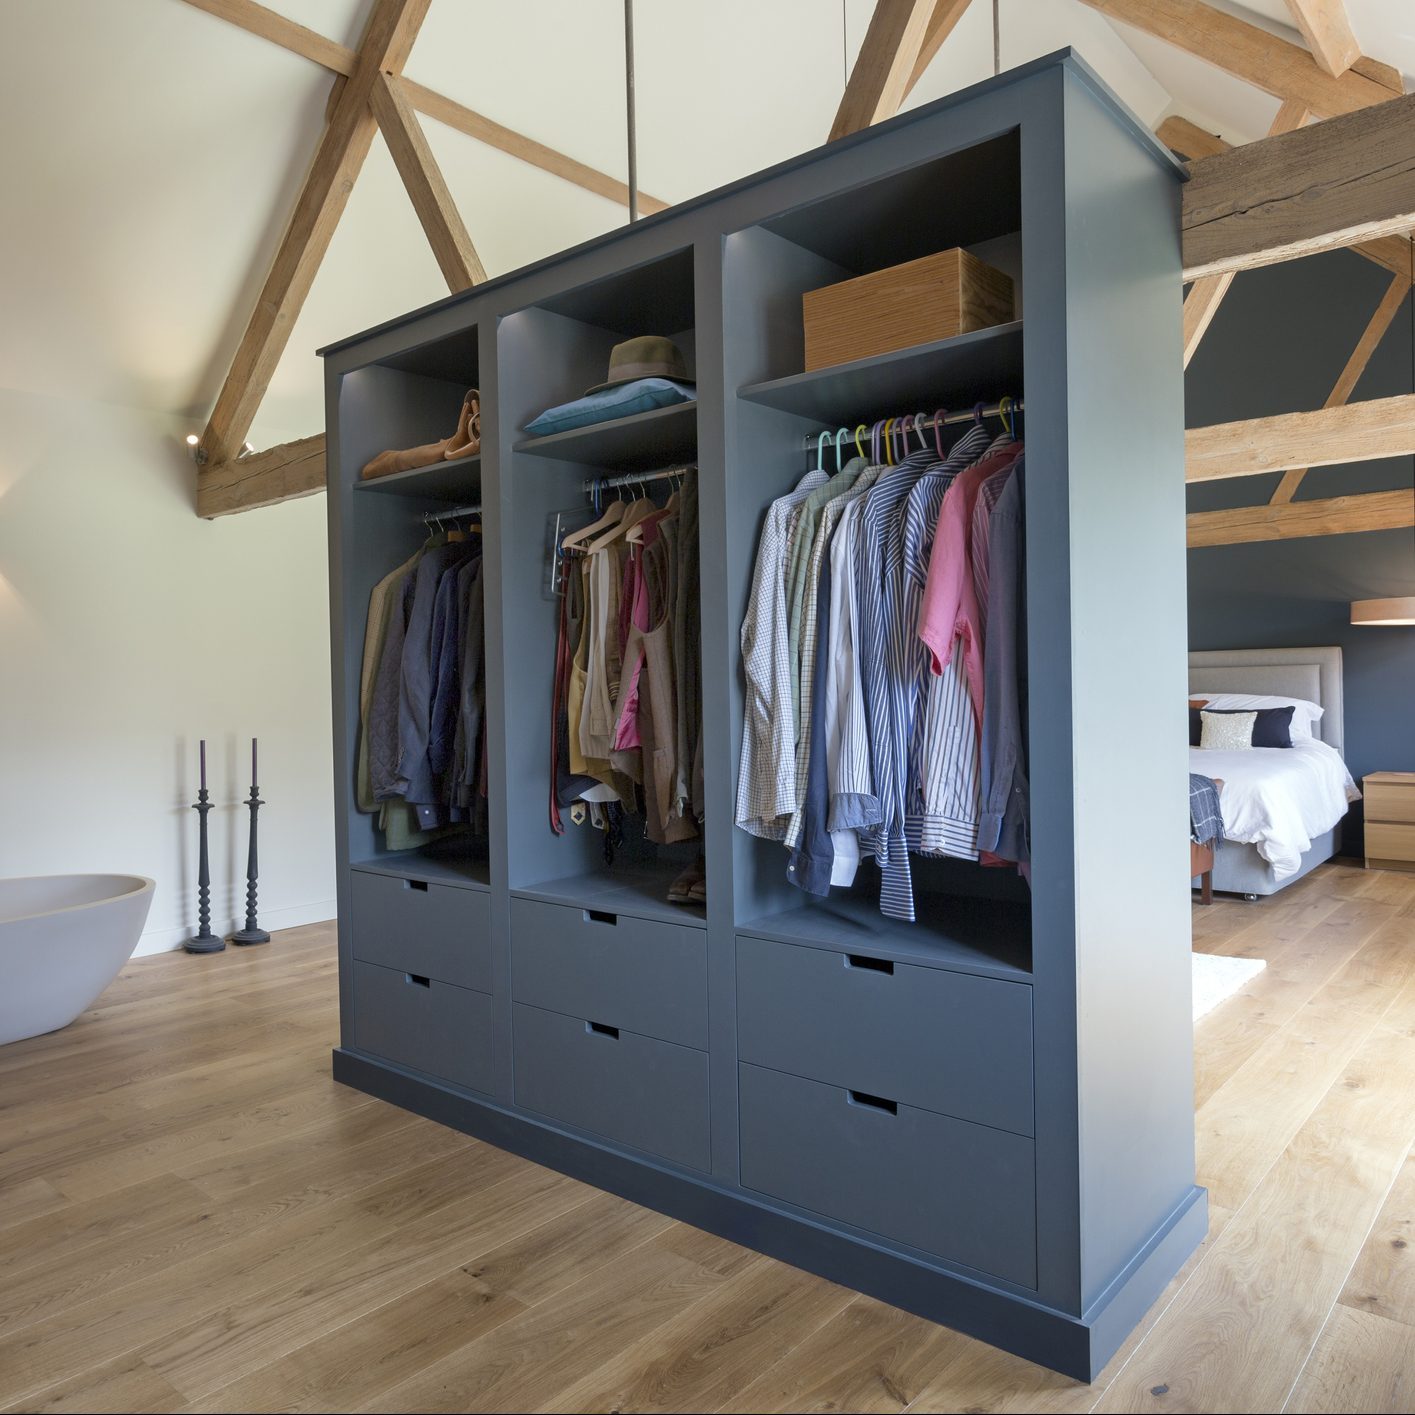 Clothes Storage Ideas: 19 Storage Ideas for Small Spaces | Reader's Digest